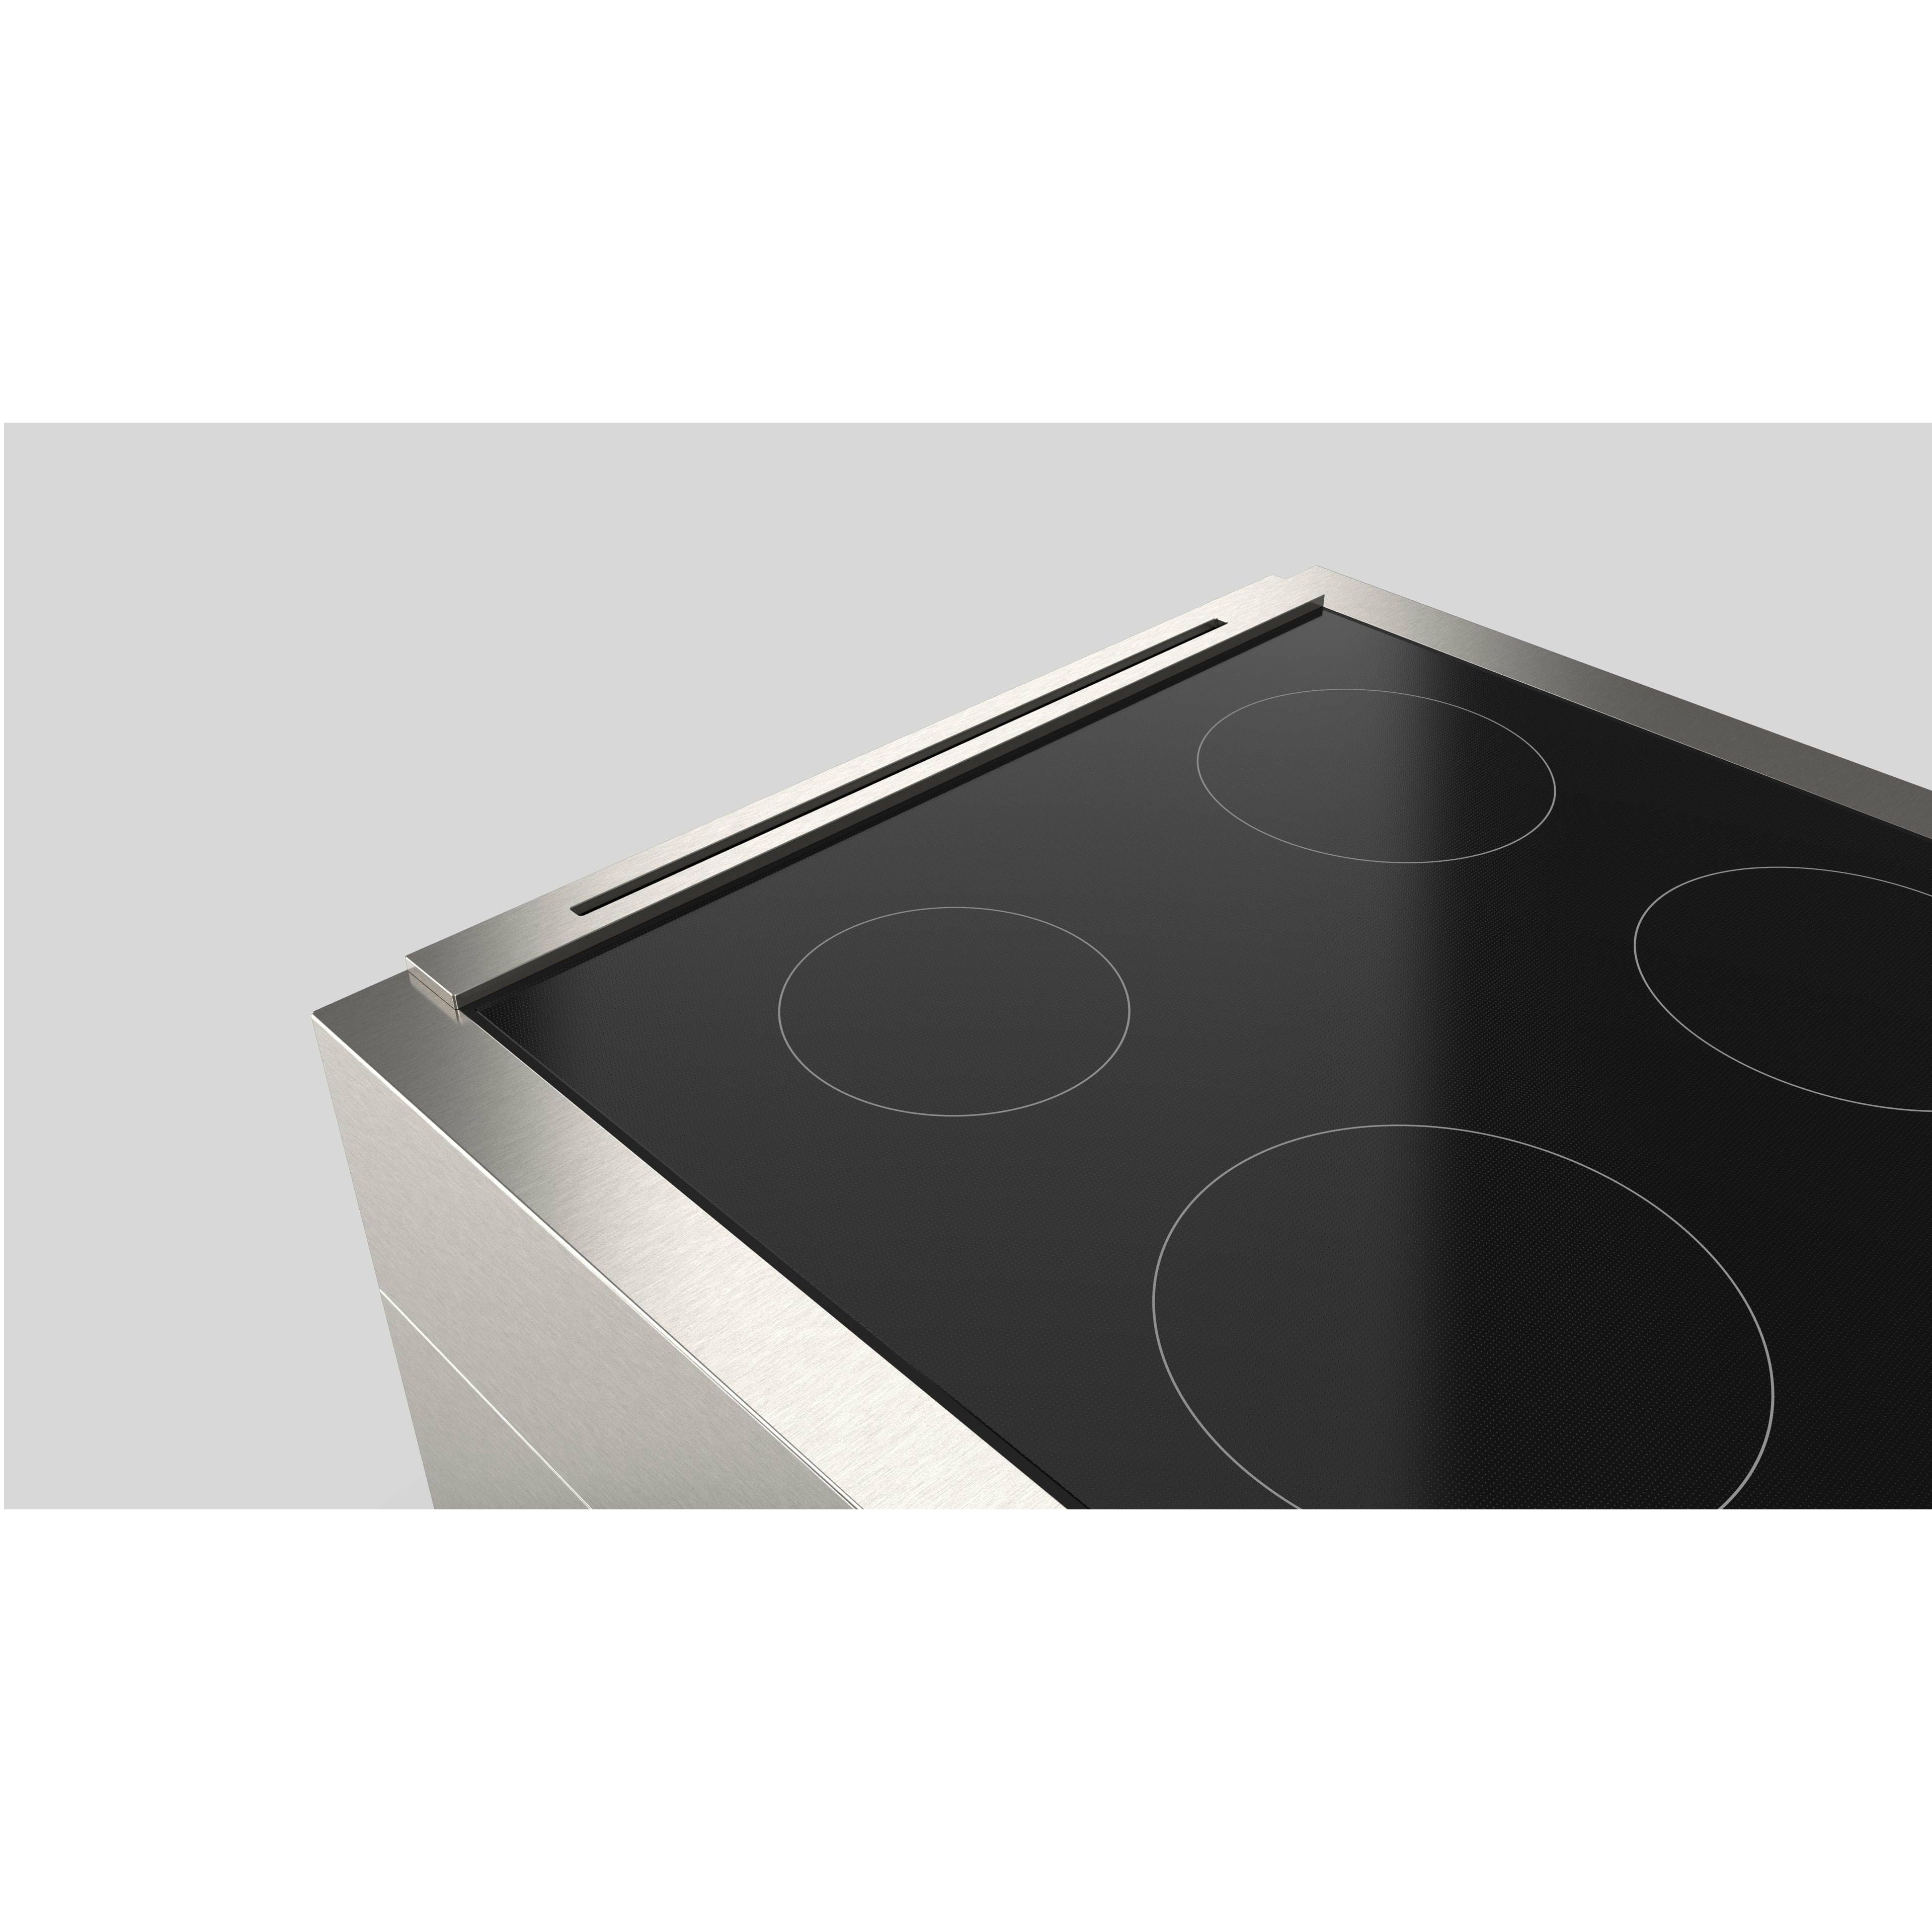 Fulgor Milano 30" Freestanding Induction Range with 4 Cooking Zones, Stainless Steel - F6PIR304S1 Ranges Luxury Appliances Direct